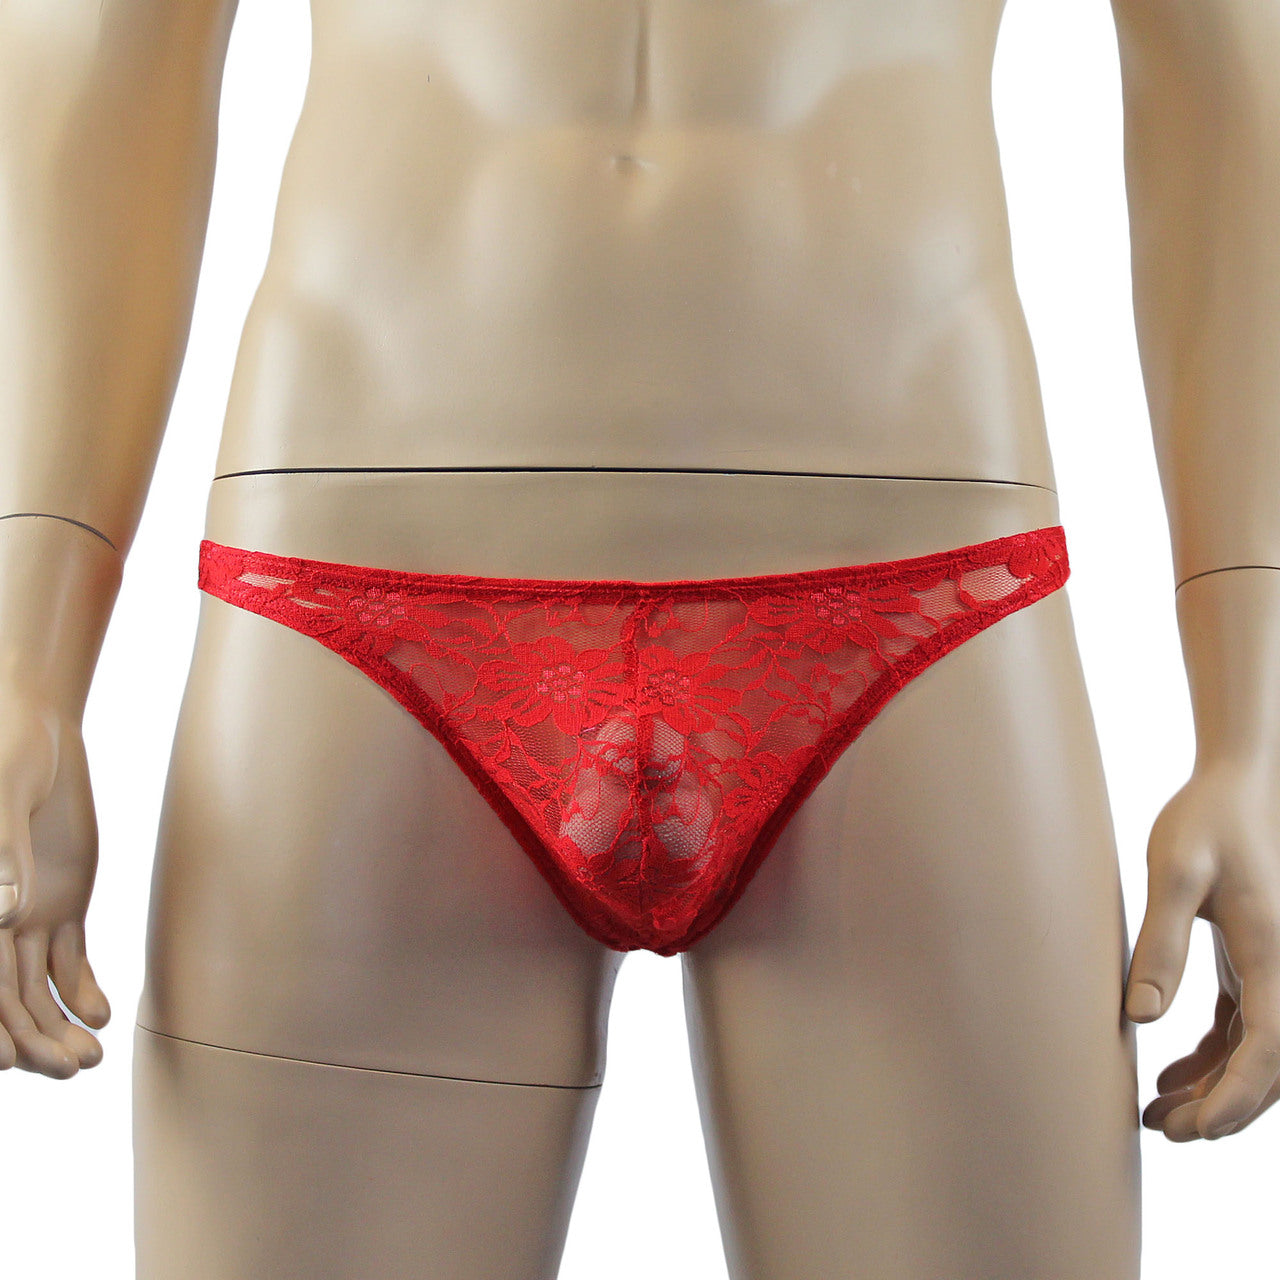 Mens Lingerie Lace Thong G string (red plus other colours)